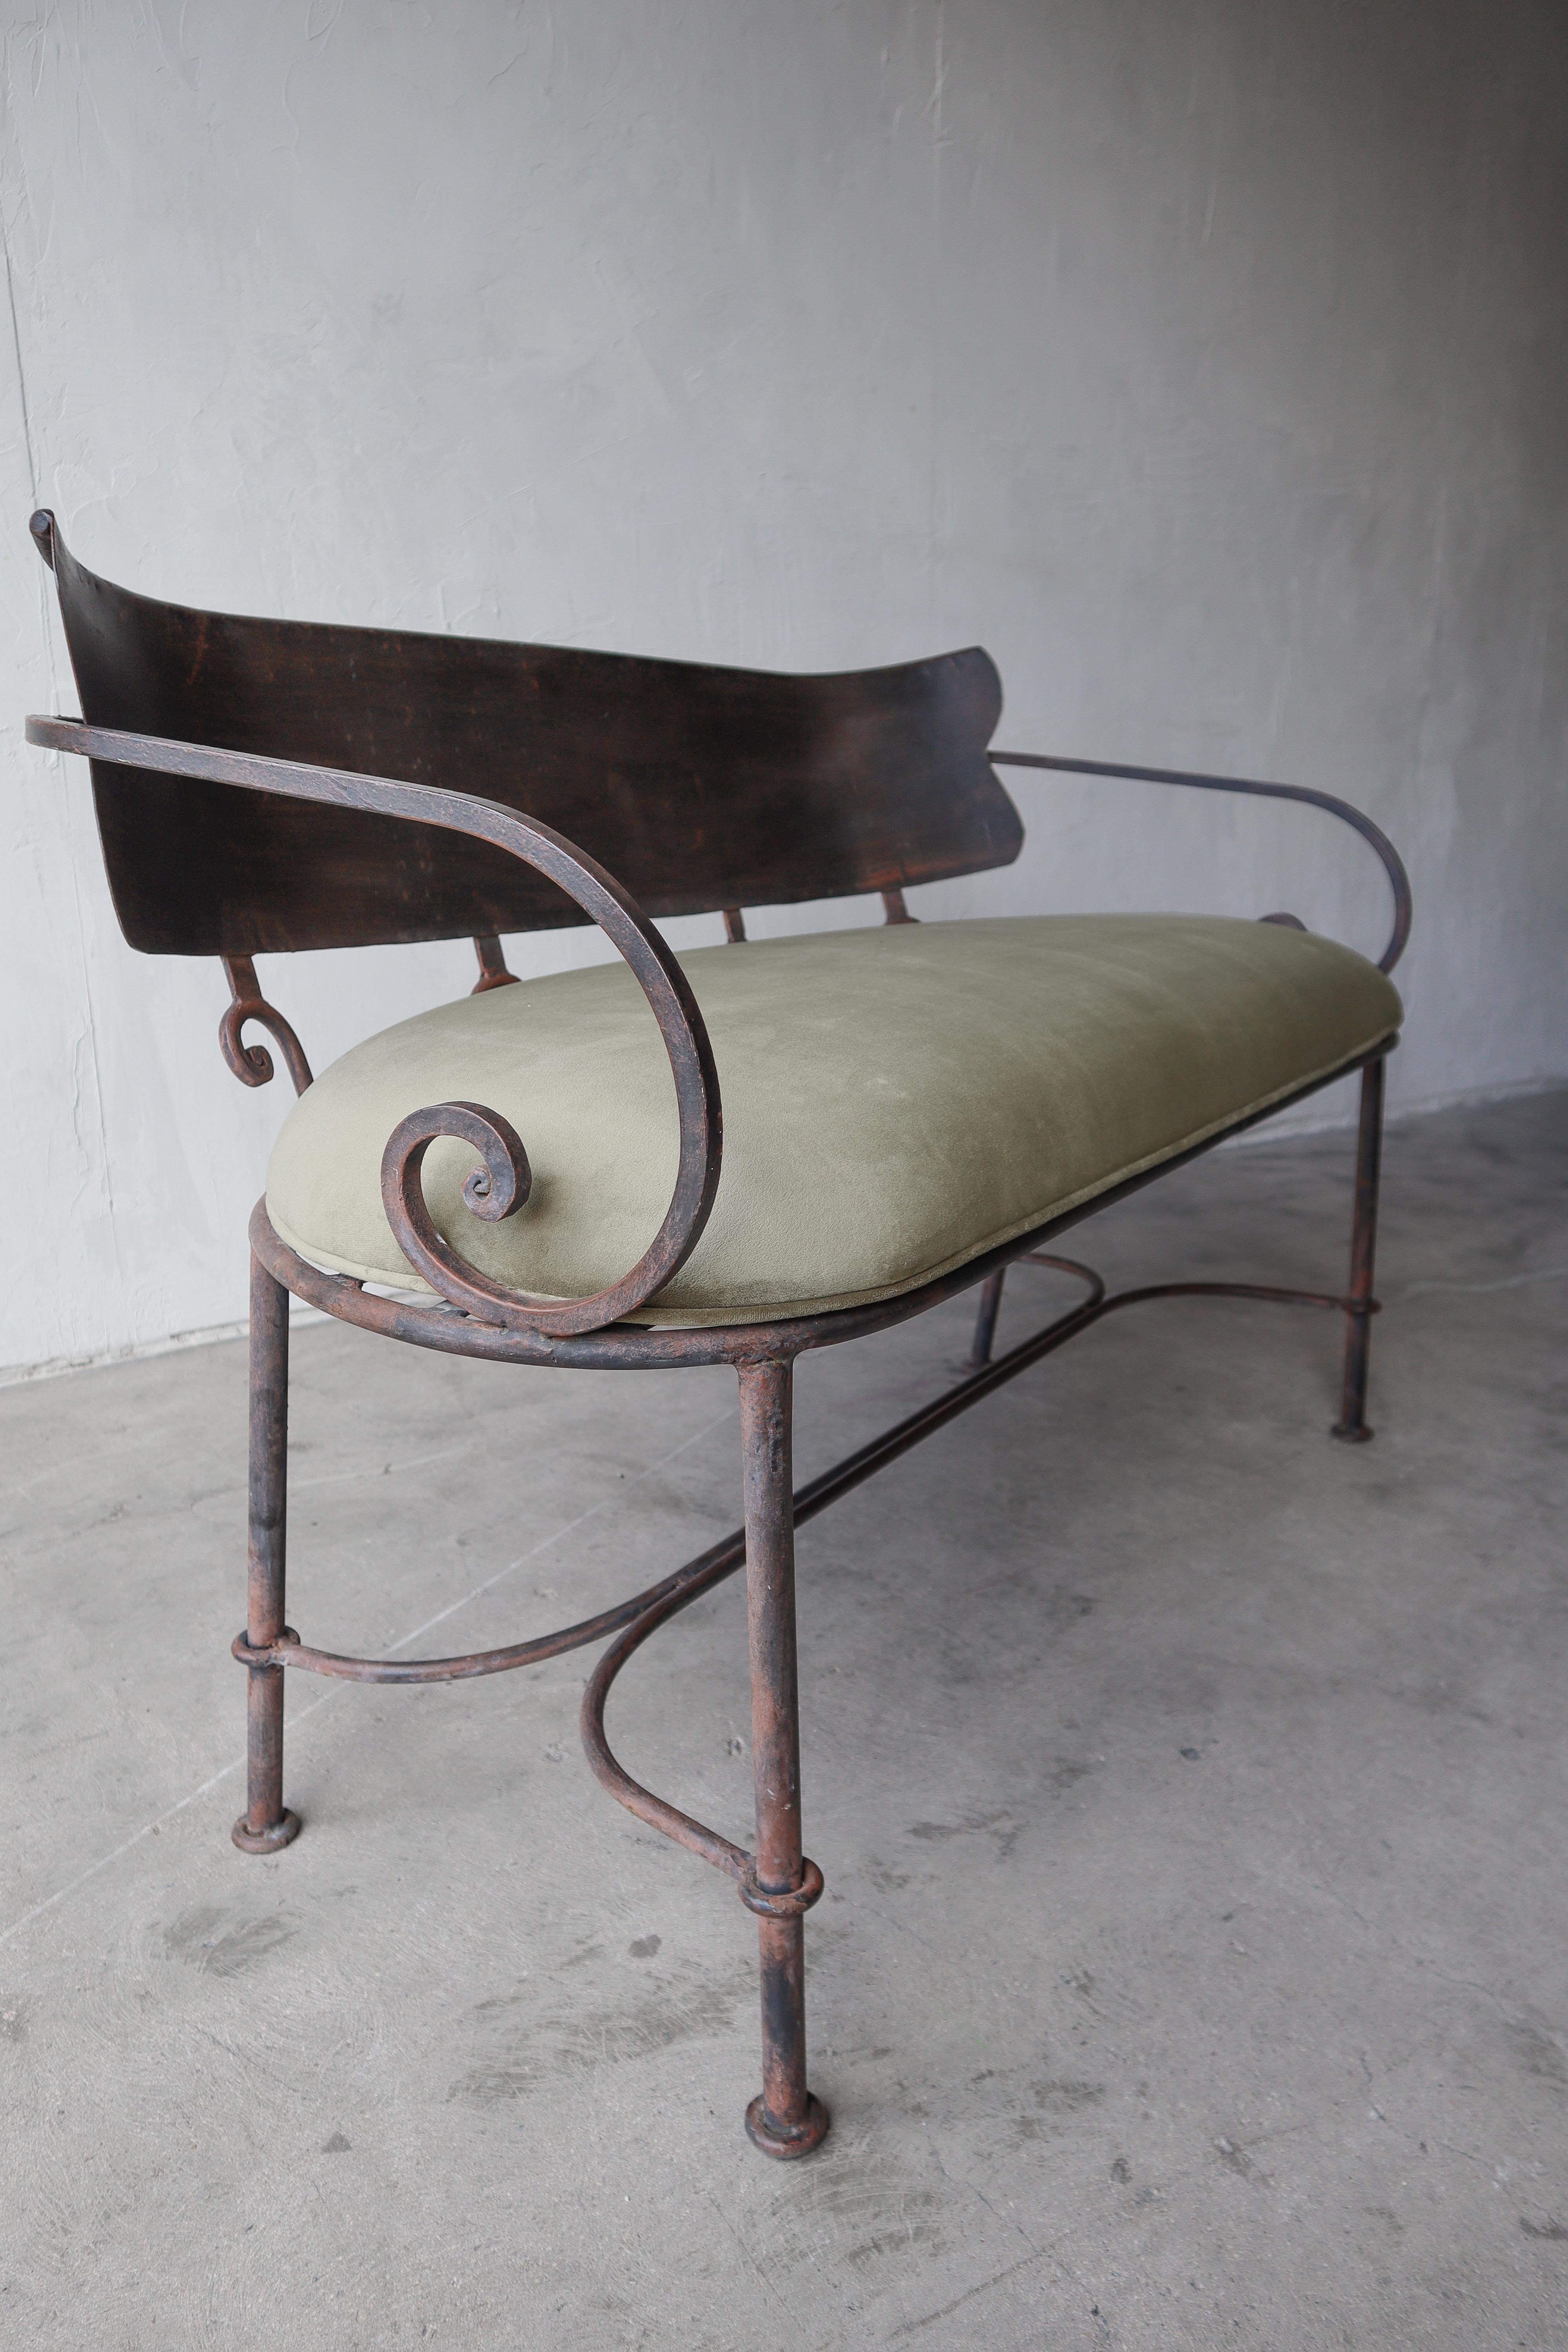 Beautiful antique iron bench settee. Bench has beautiful details, its truly a piece of art. It will add interest to many decor styles. It c an be used indoors with its custom upholstered seat or outdoor without it, showcasing its woven seat.